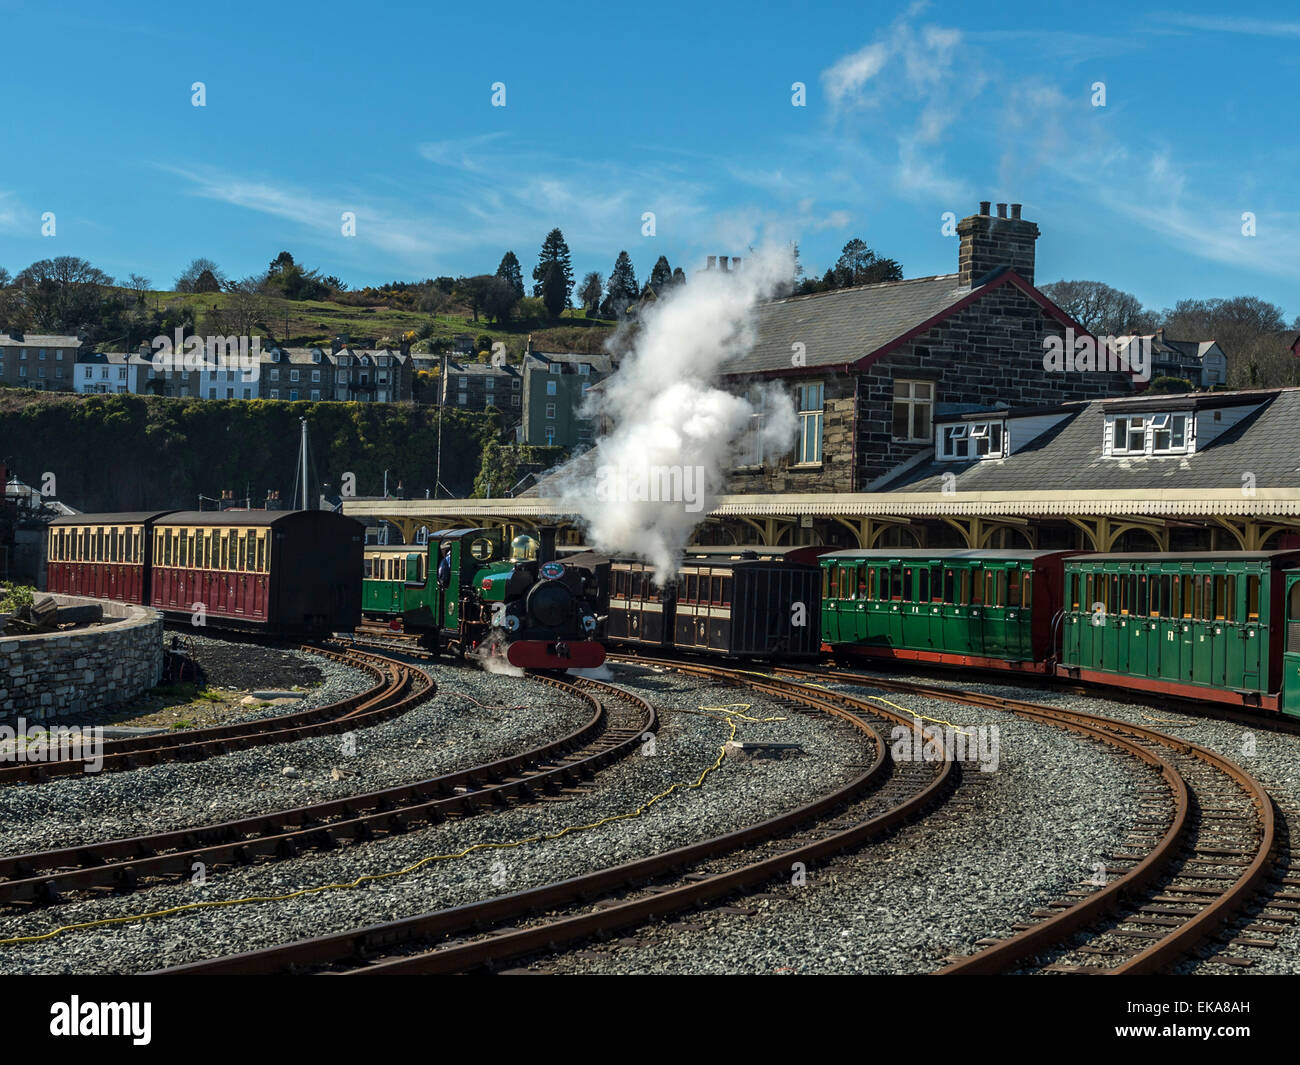 Blanche, a saddle-tank tender engine, lets off steam at Porthmadog railway station, Wales. Stock Photo